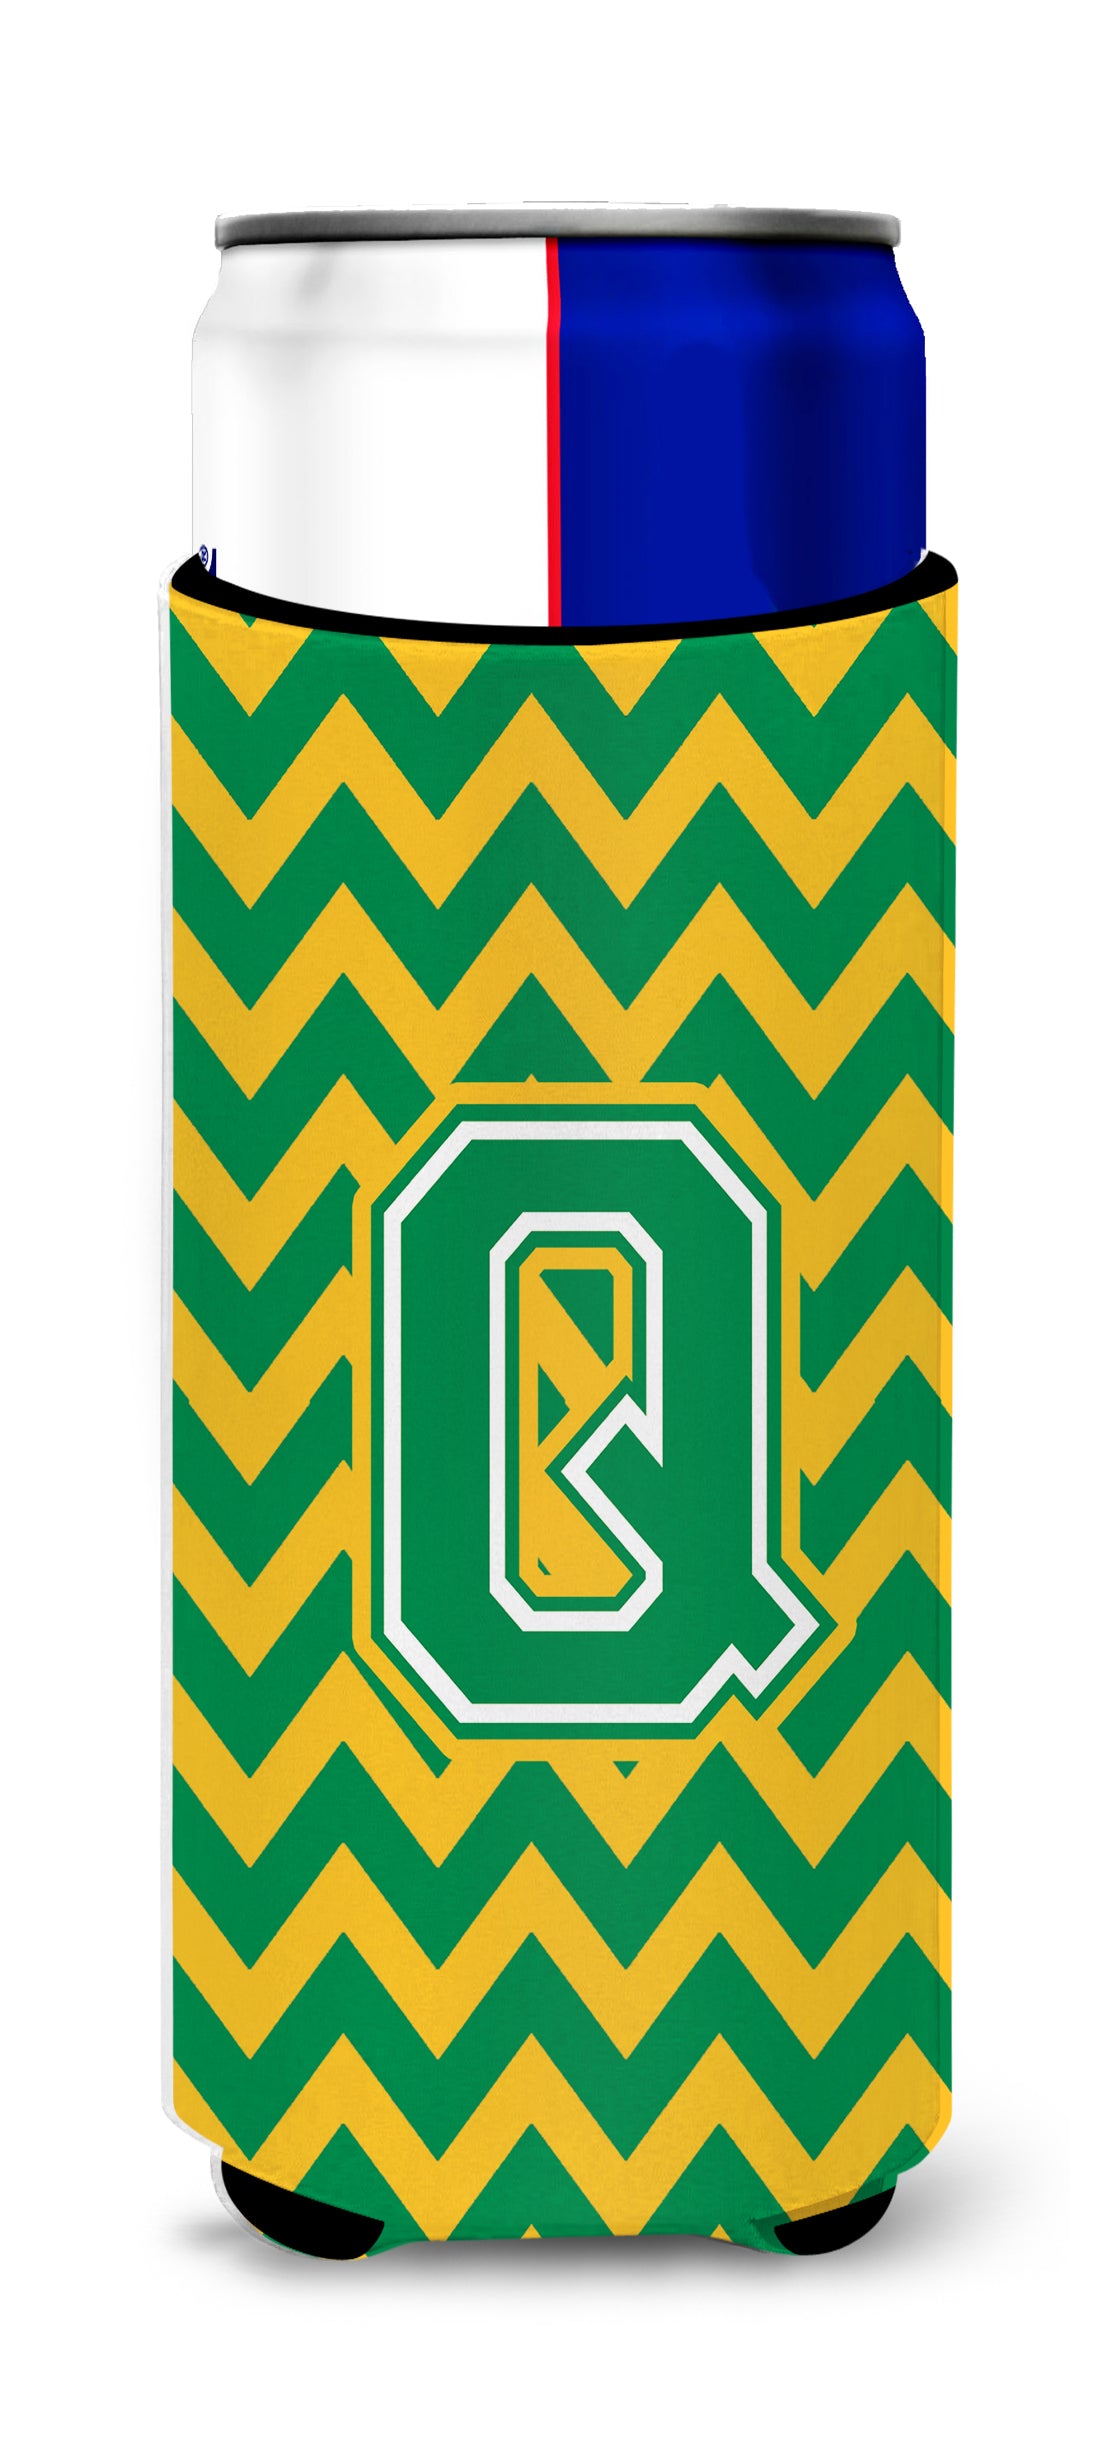 Letter Q Chevron Green and Gold Ultra Beverage Insulators for slim cans CJ1059-QMUK